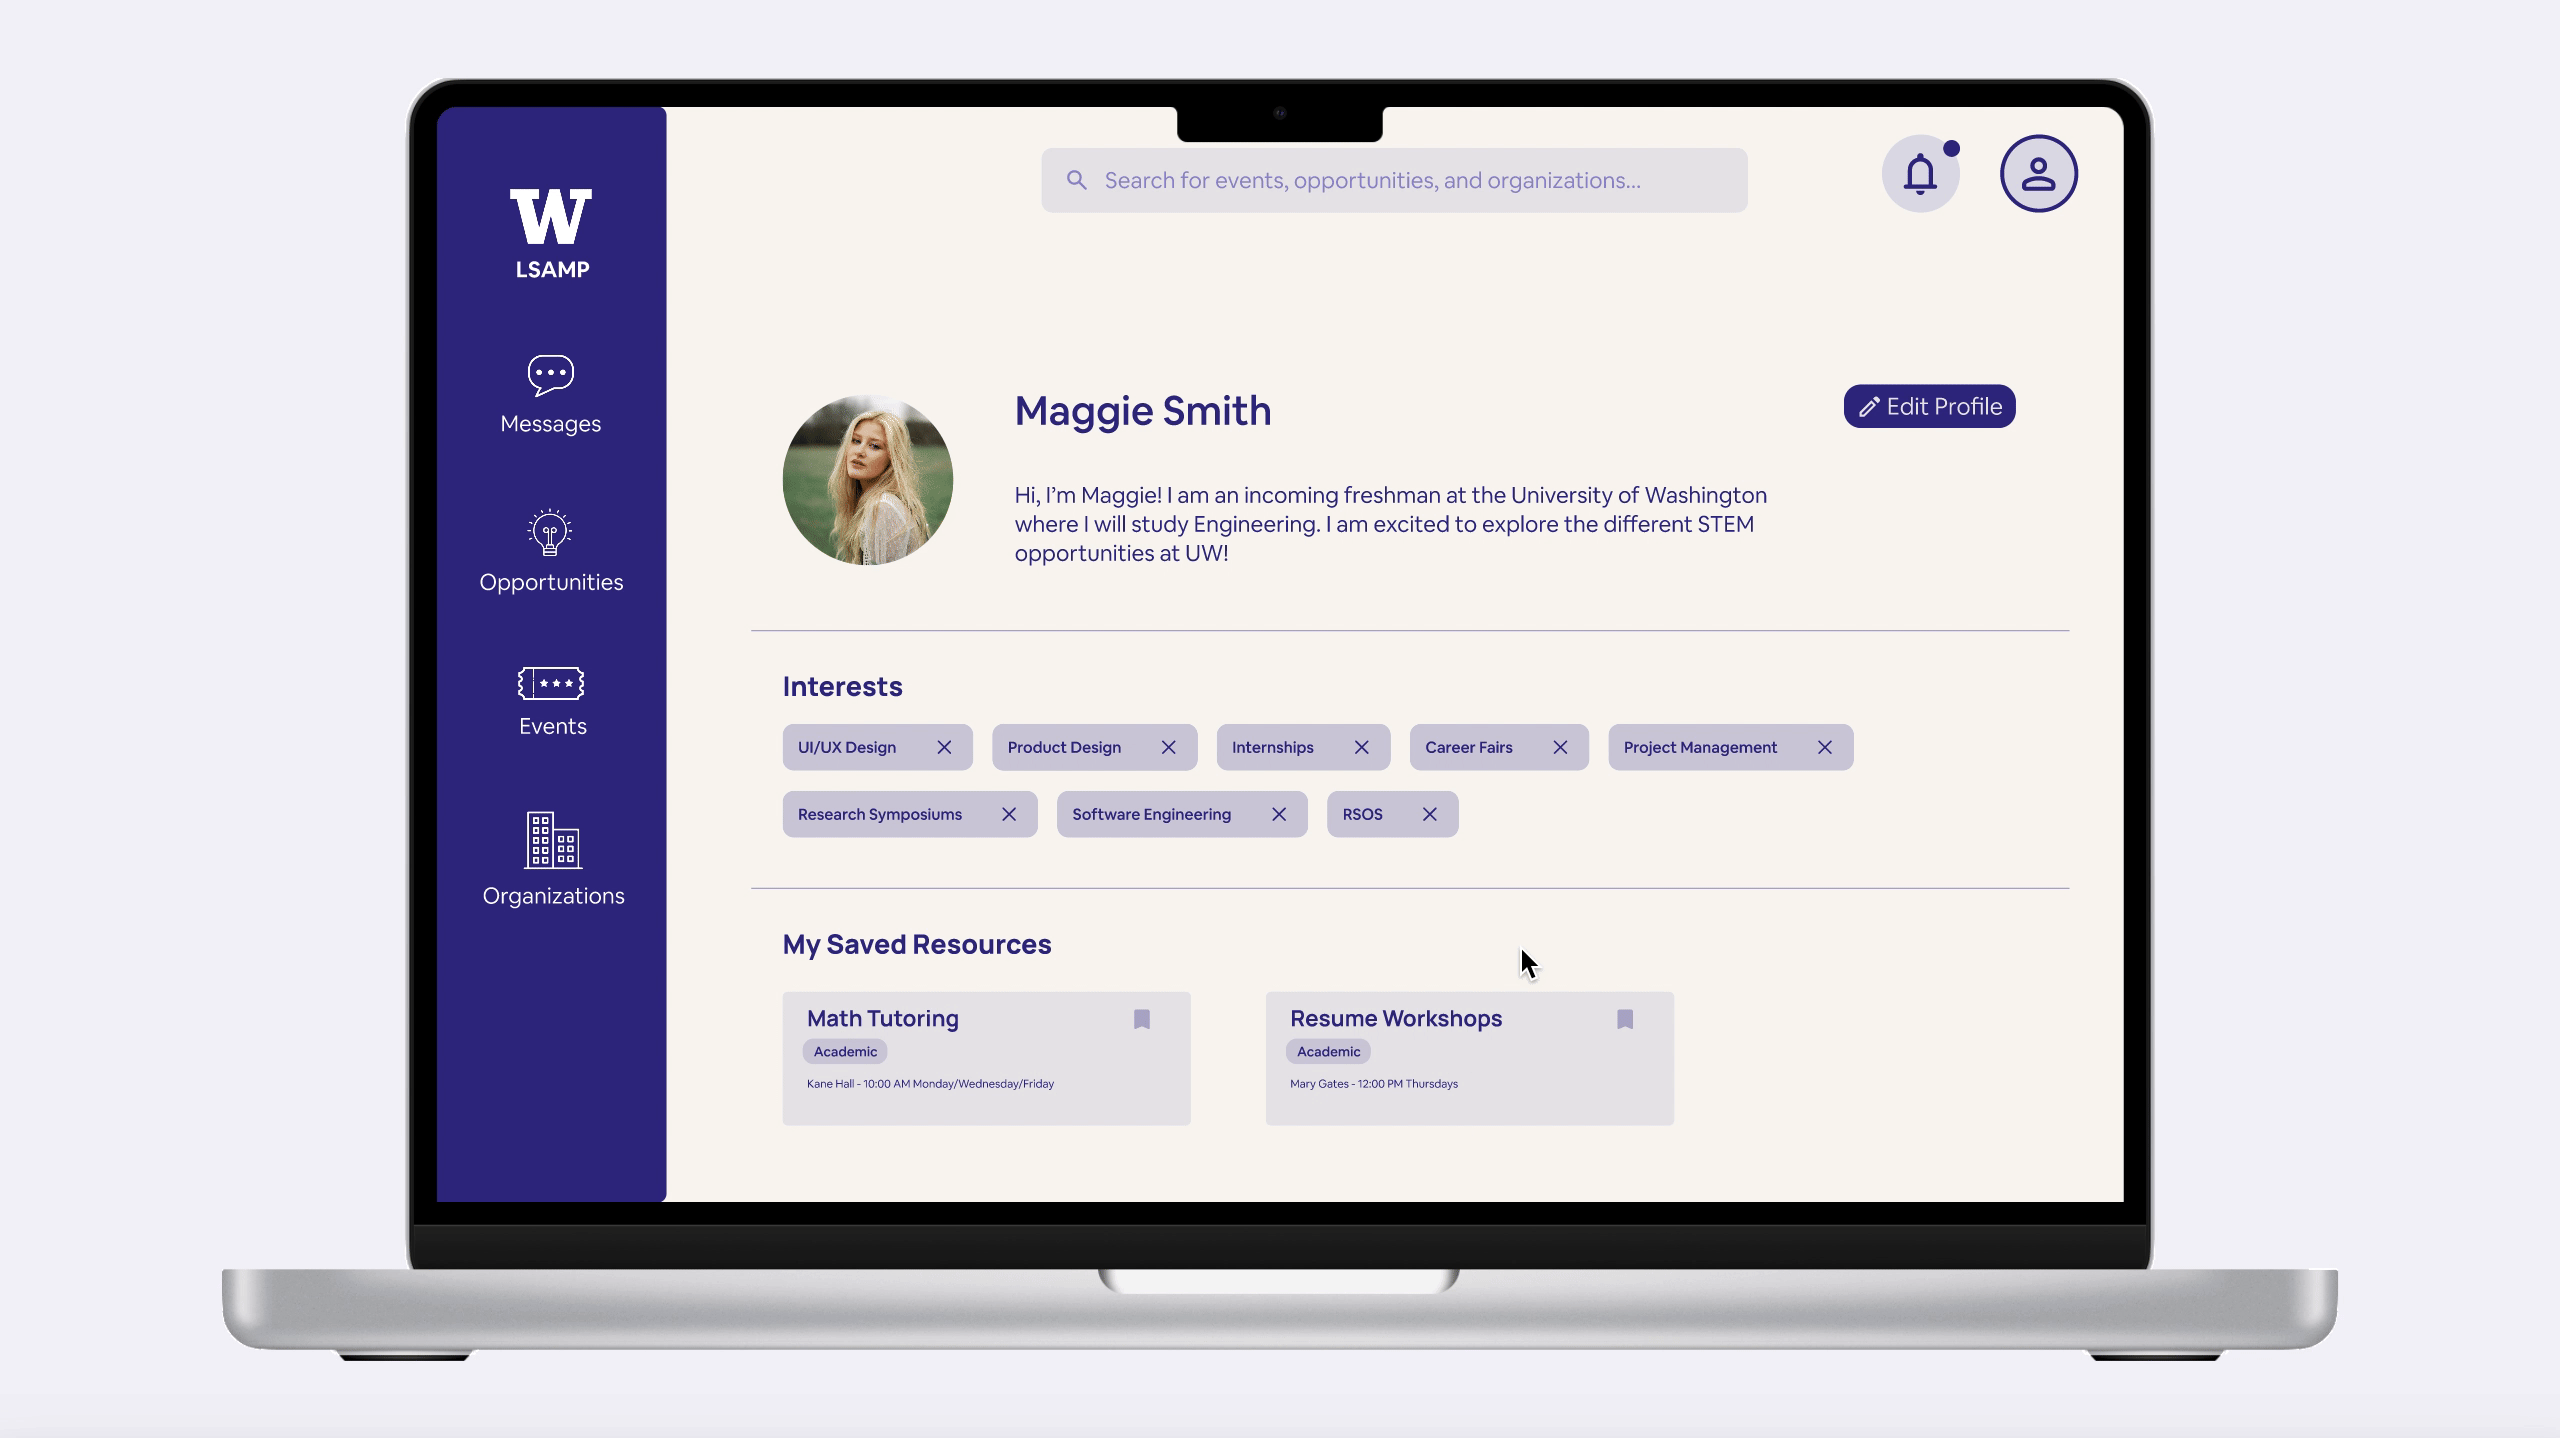 Final design - Recommended resources based on user profile